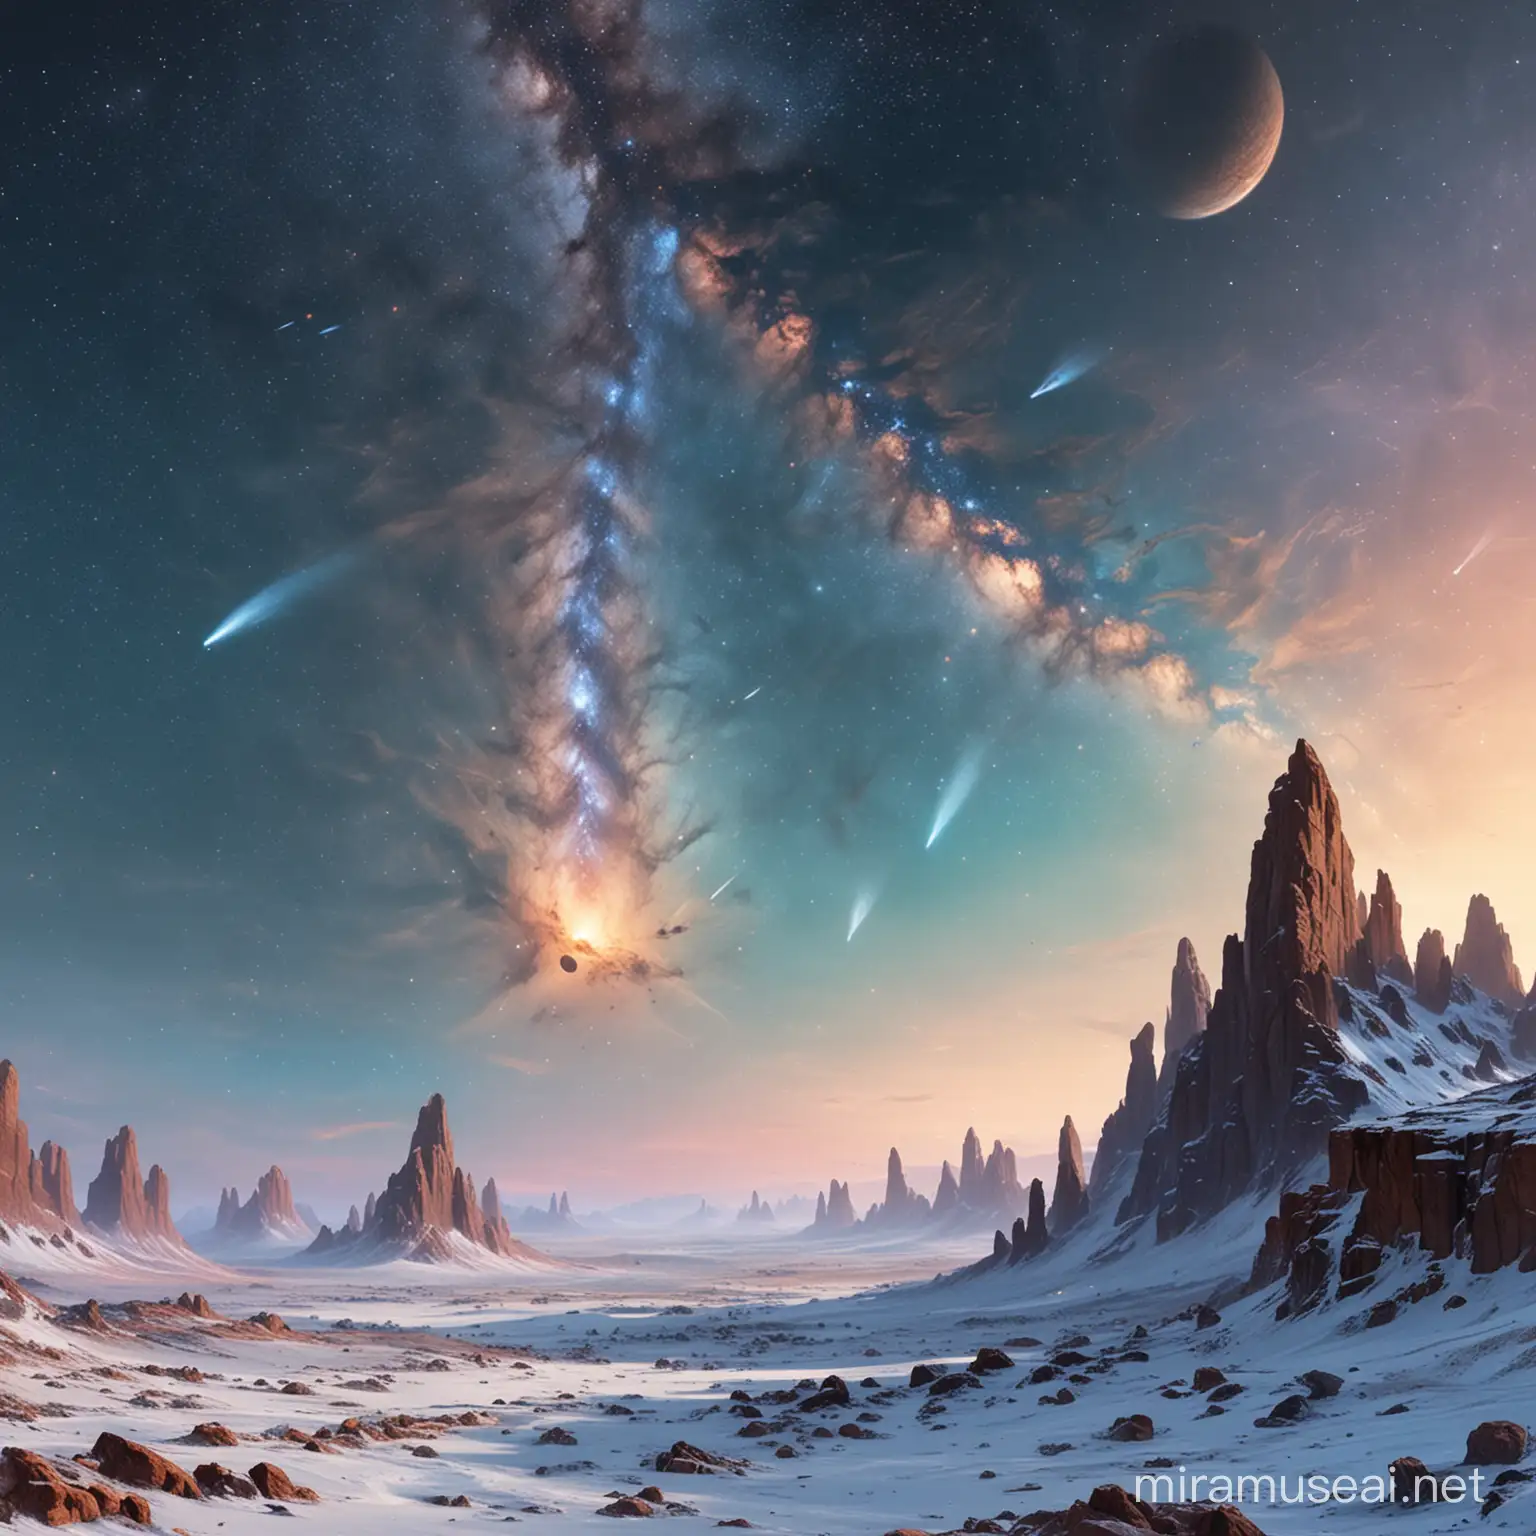 Highly detailed painting in the style of Max Bertolini, 3 spacecraft take off from an icy planet with rocky pinnacles, in the sky is a ((Andromeda spiral galaxy)), wide view, use muted pastel colors only, high quality